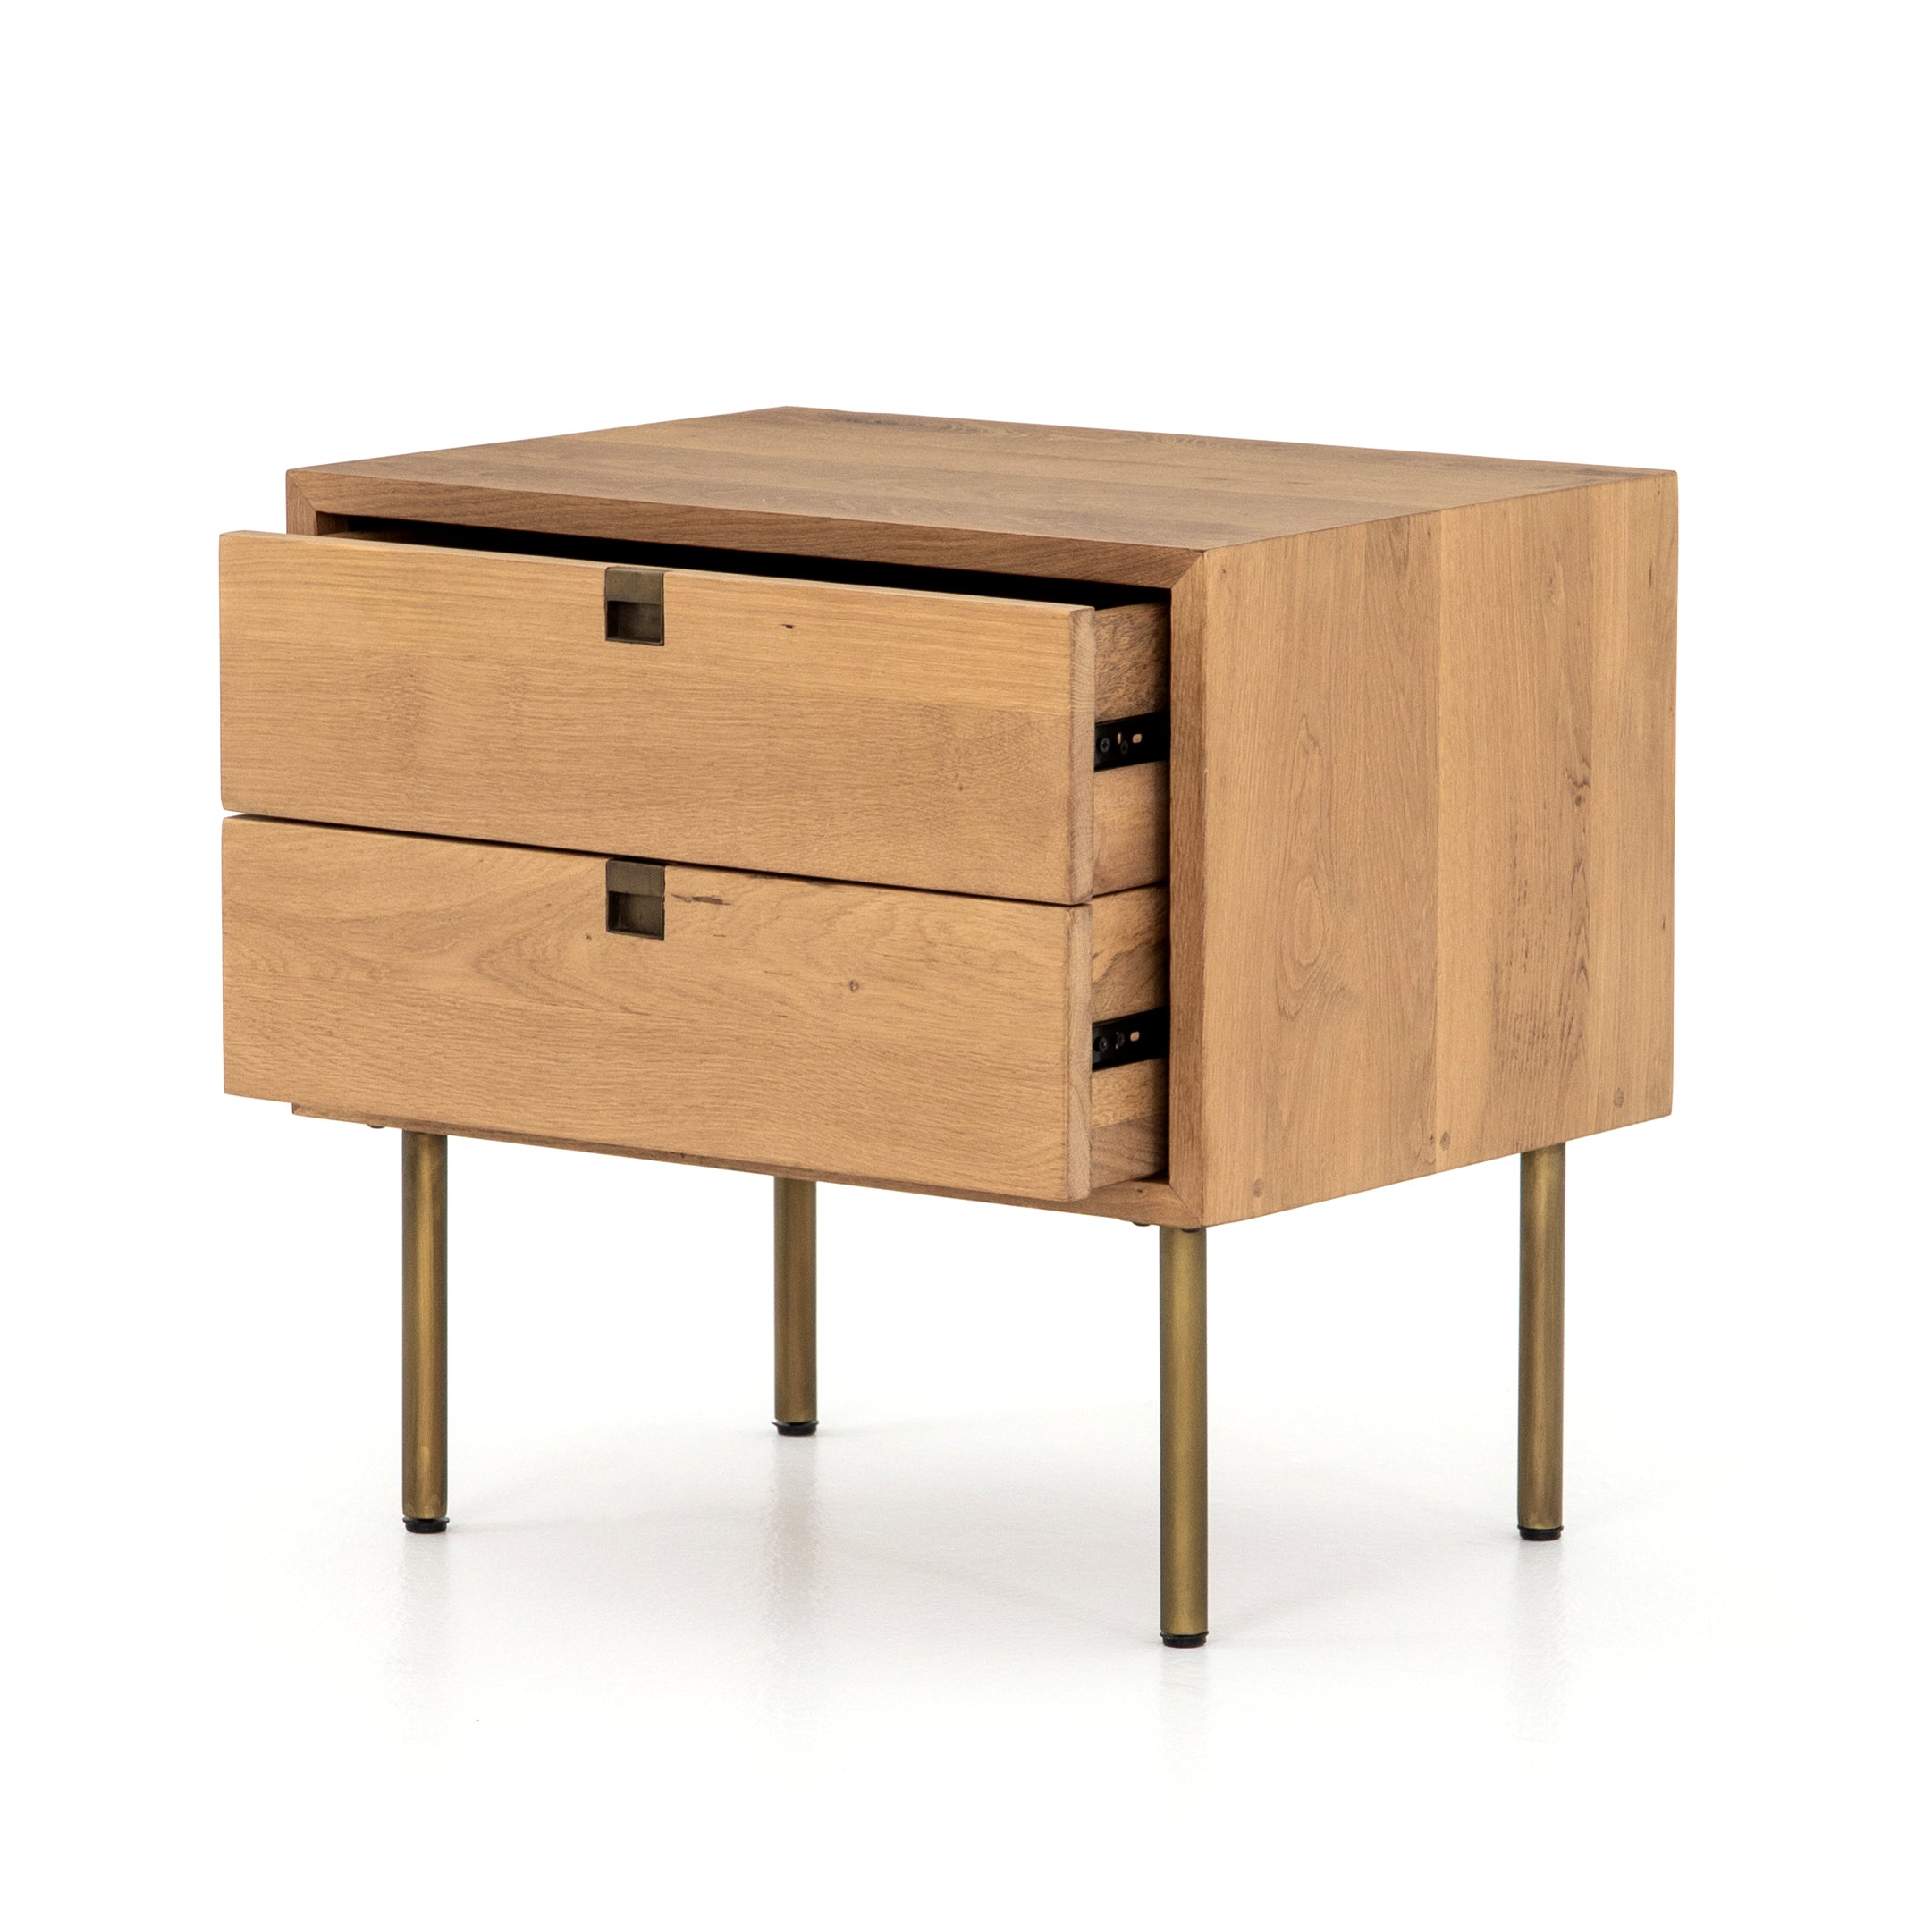 Style meets simplicity in this Danish-inspired design. Solid natural oak forms clean lines, welcoming dual drawers with squared iron hardware in a satin brass finish. Great solo or in pairs, for handy bedside storage.  Overall Dimensions: 24.00"w x 18.00"d x 23.00"h Colors: Satin Brass, Natural Oak Materials: Iron, Oak